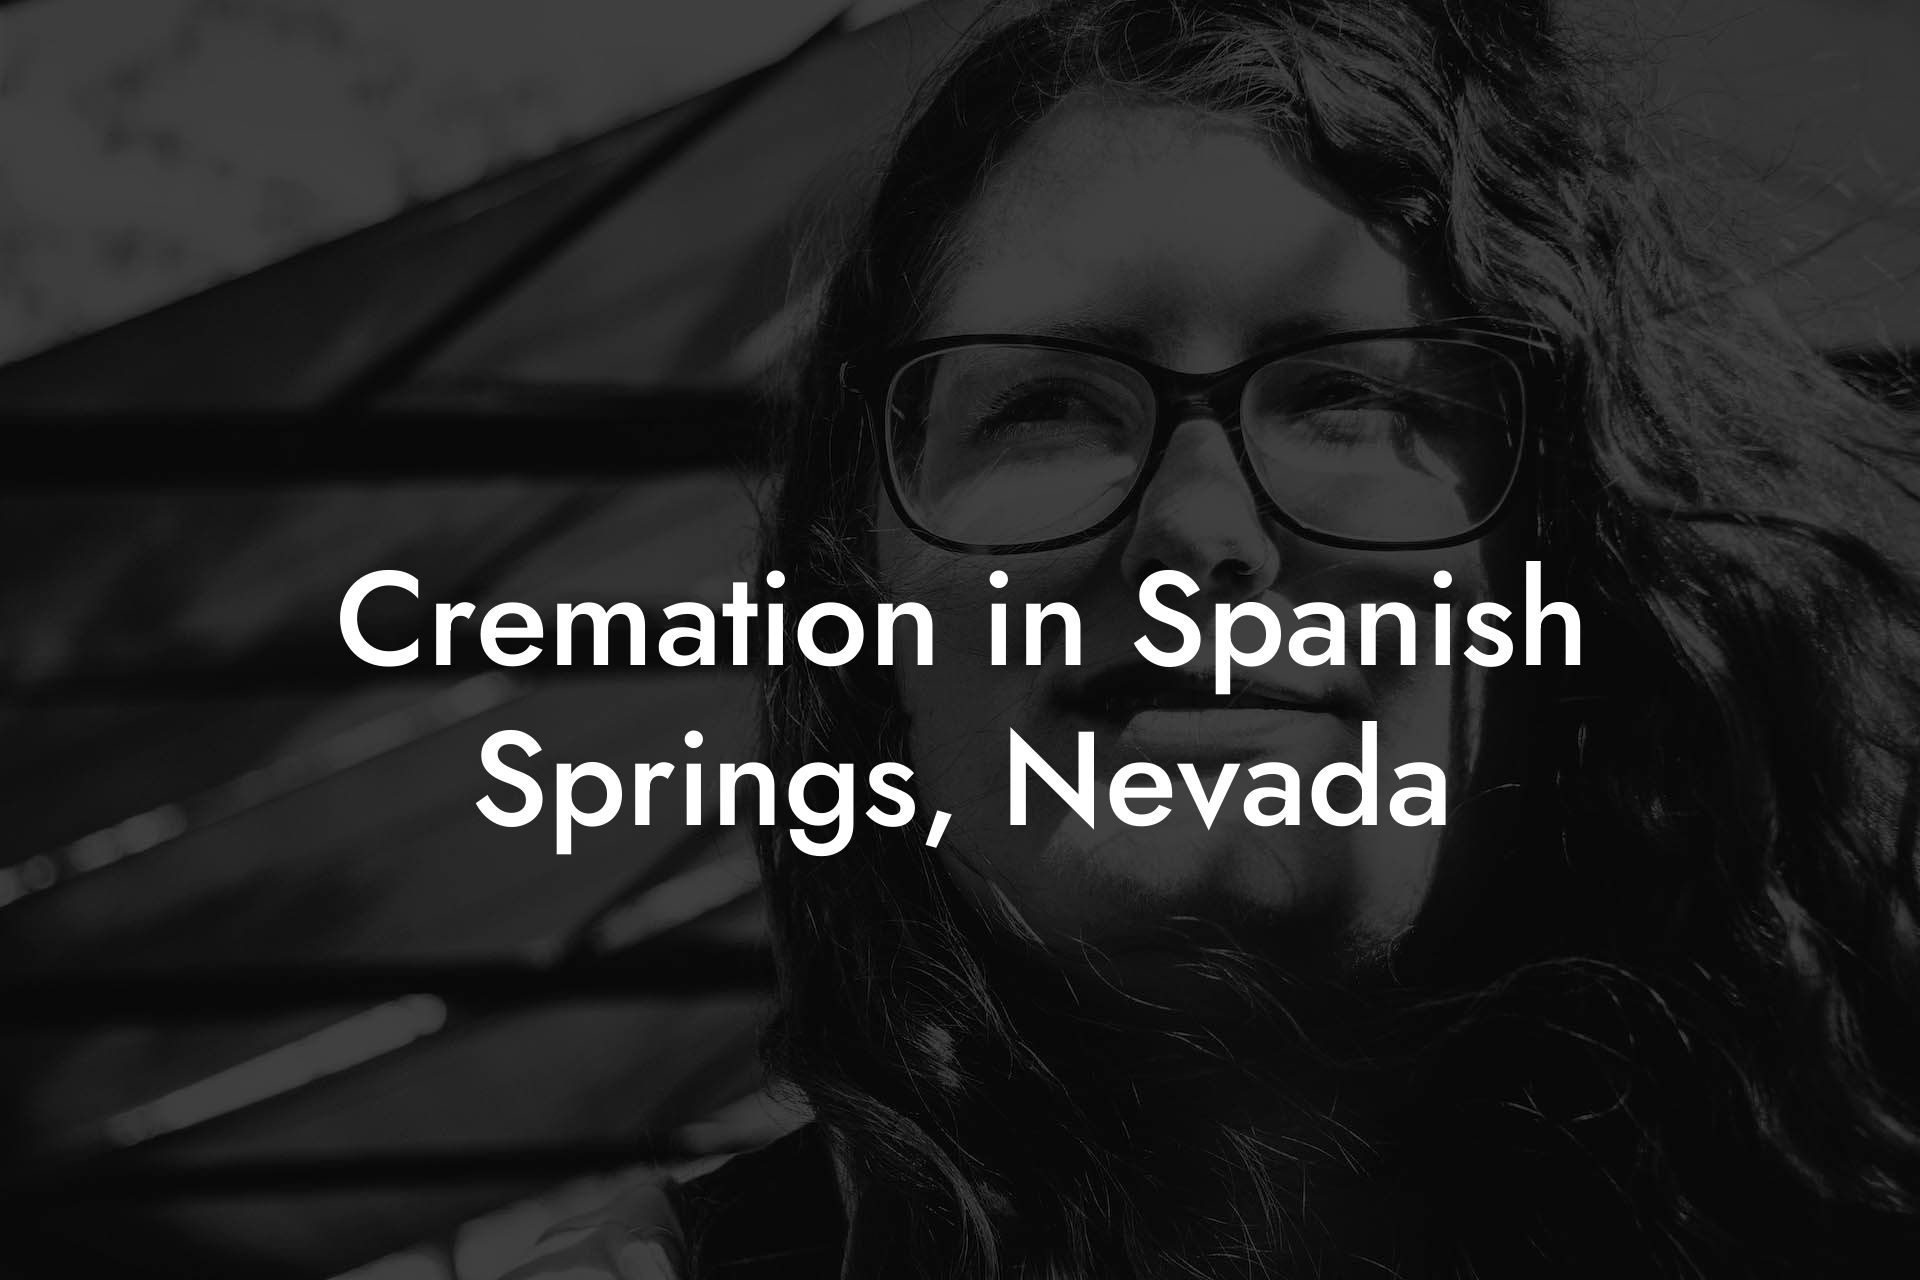 Cremation in Spanish Springs, Nevada